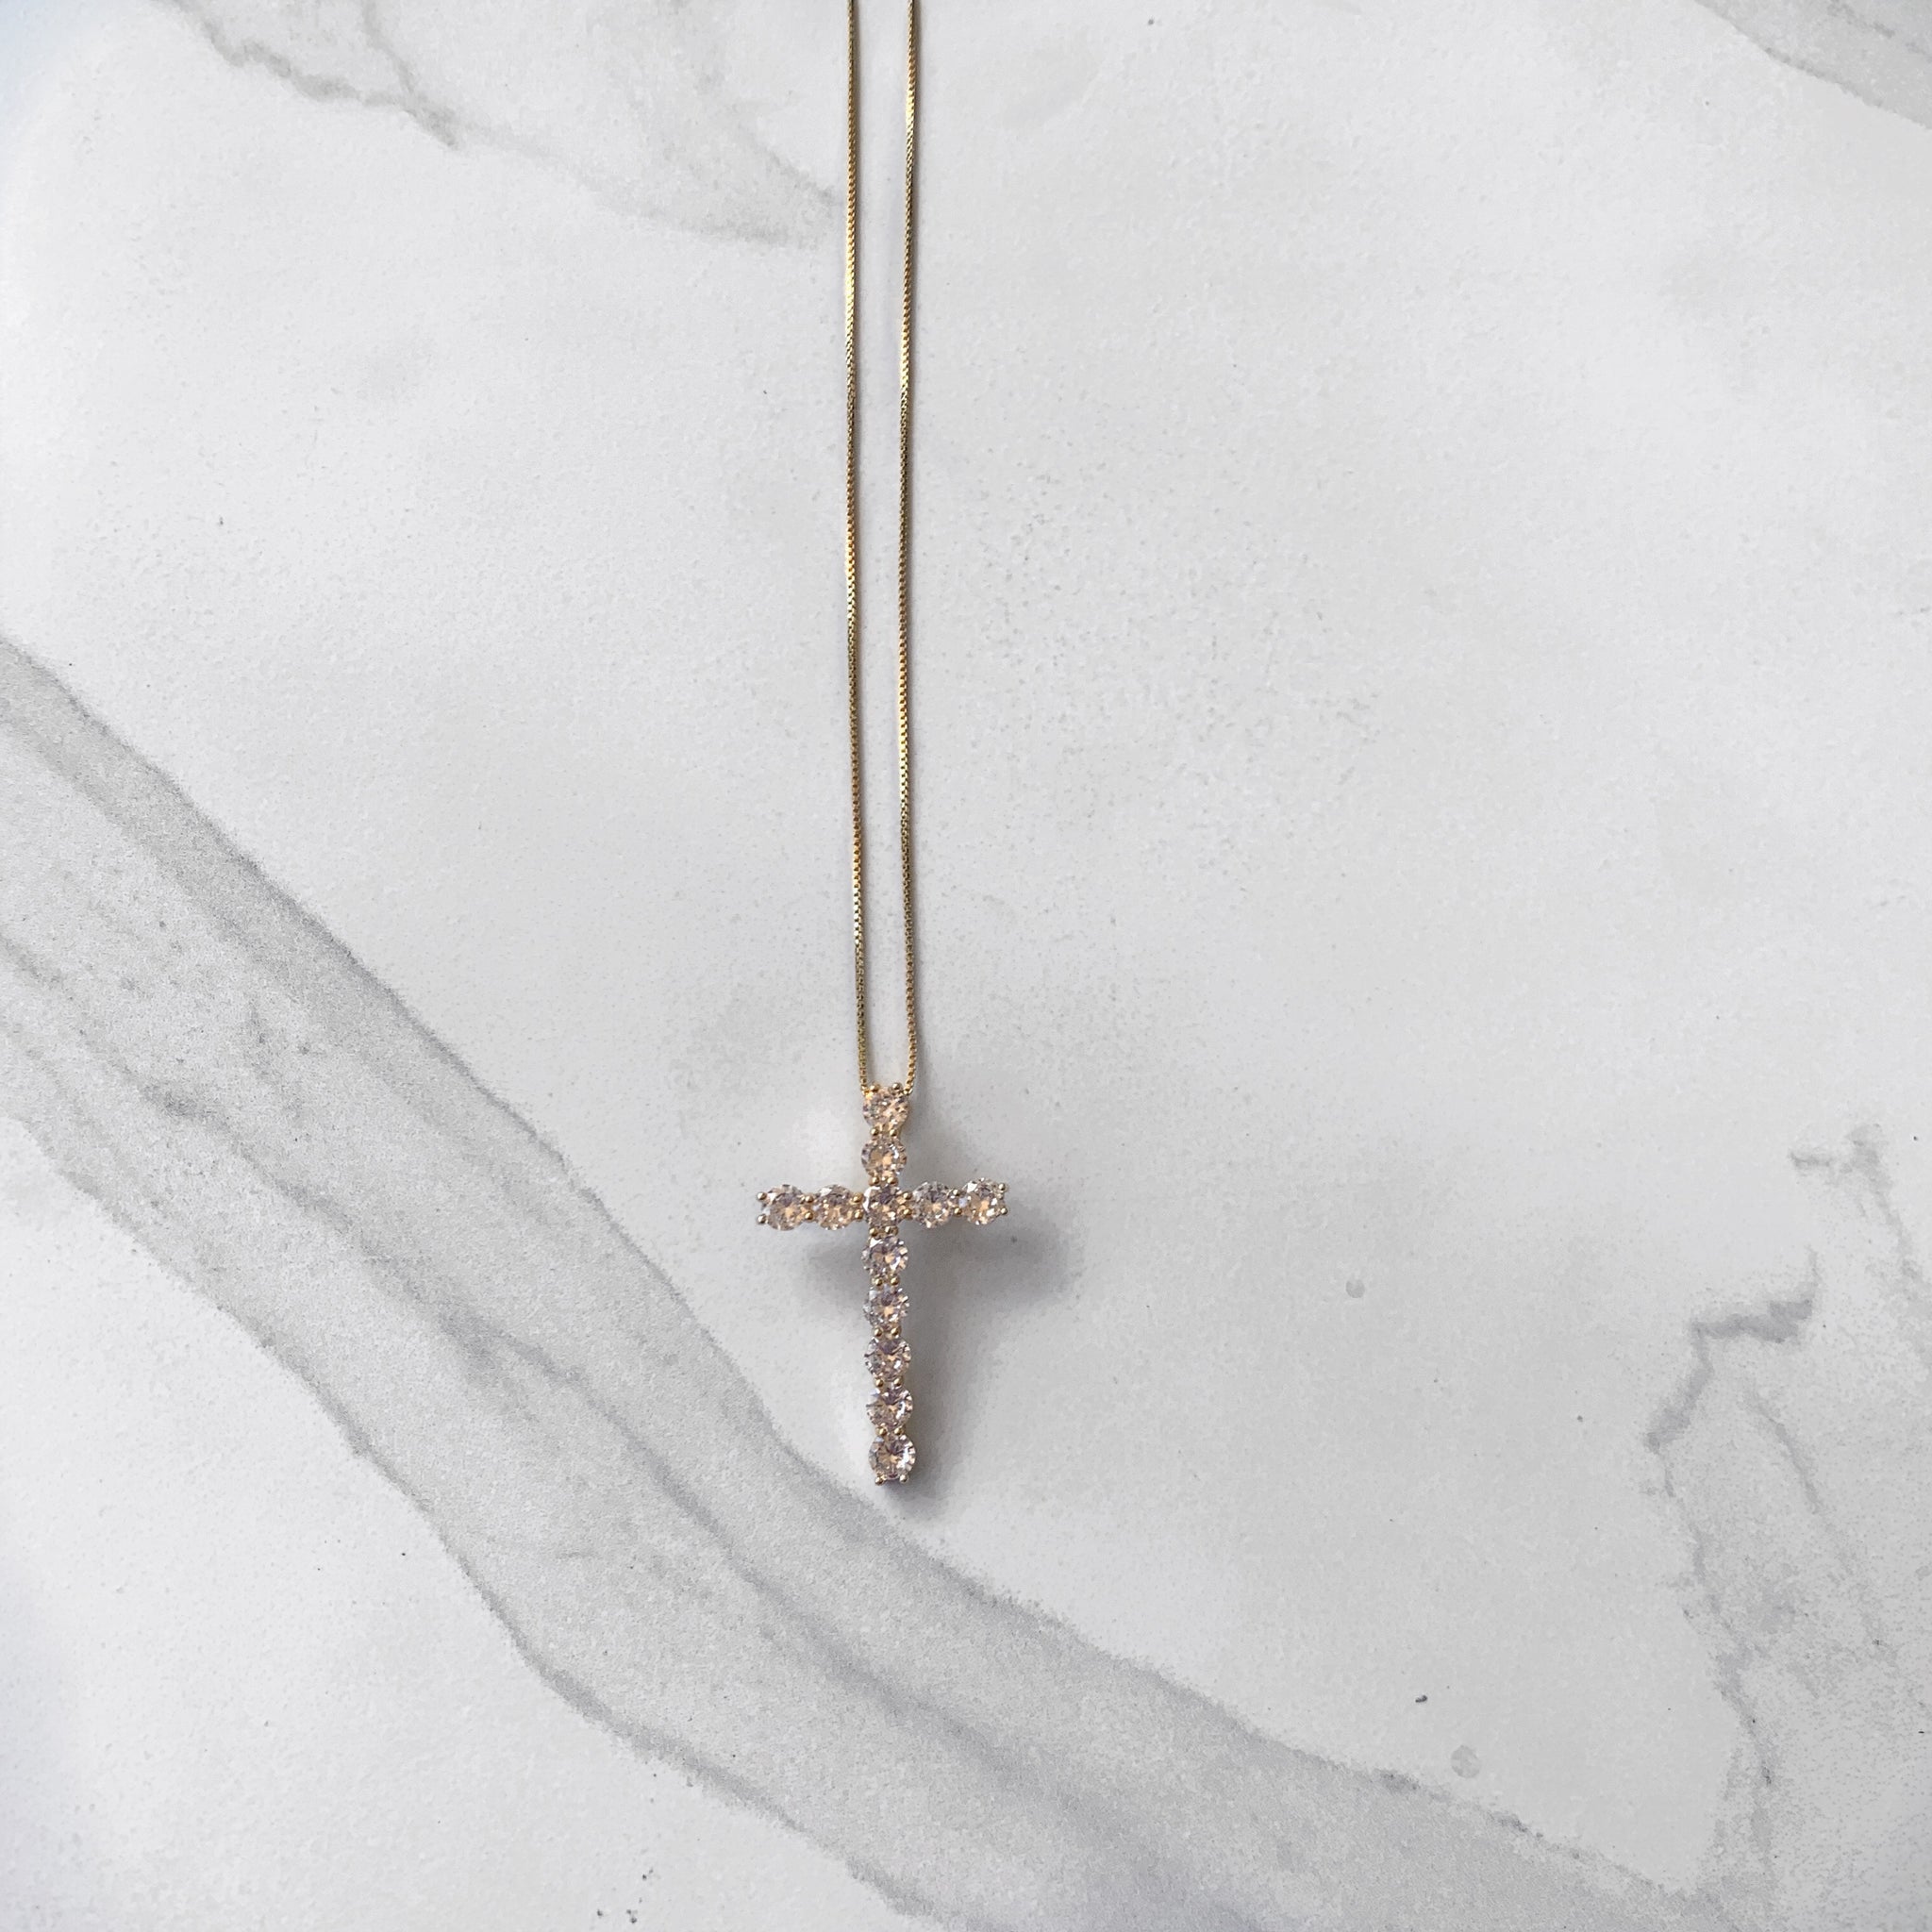 Madeline Cross necklace - Gold